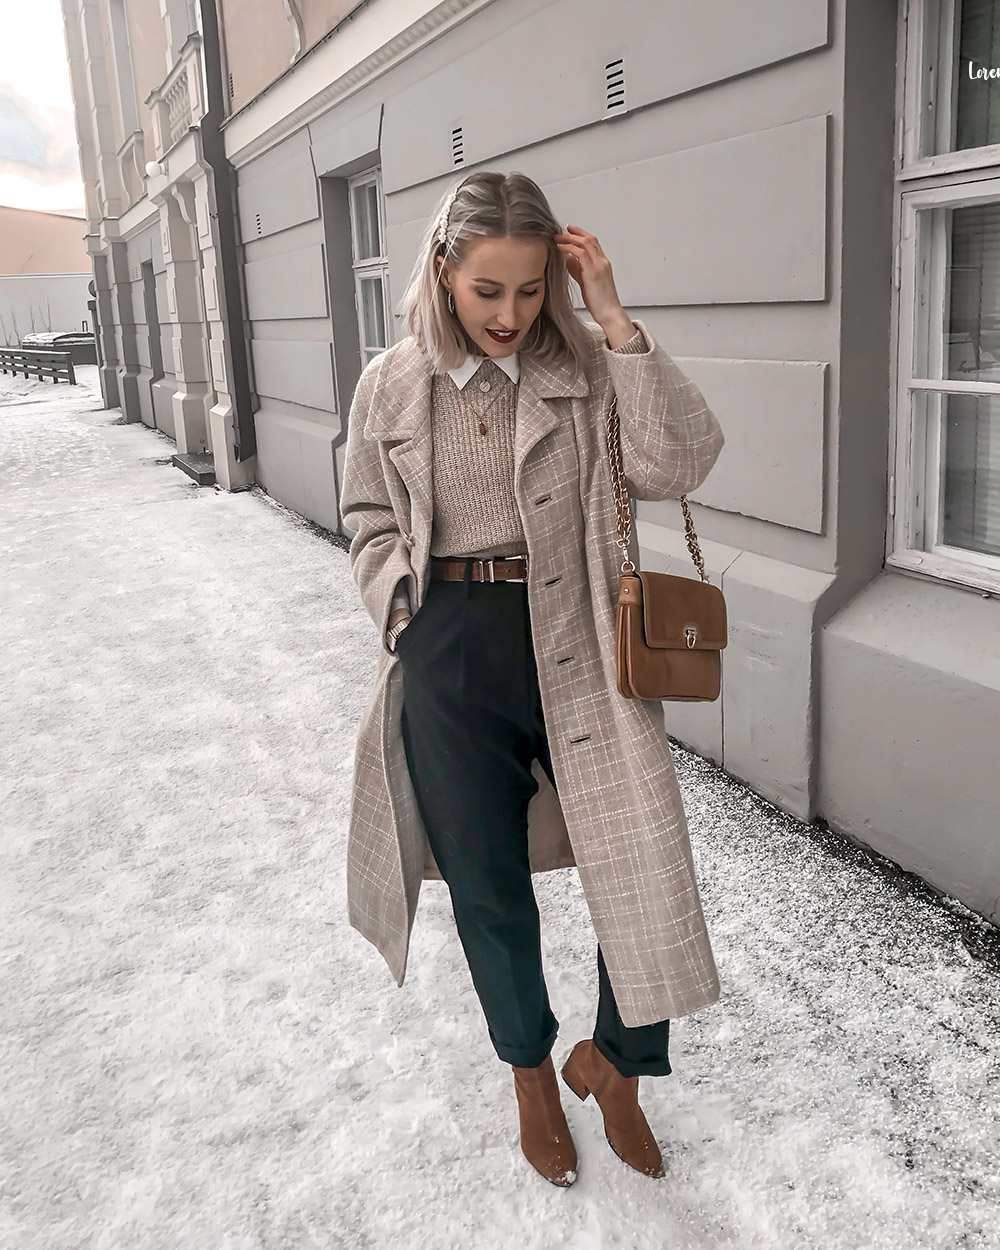 Winter Fashion Trends: 3 Key Pieces to Take Your Style Up a Notch - Masala